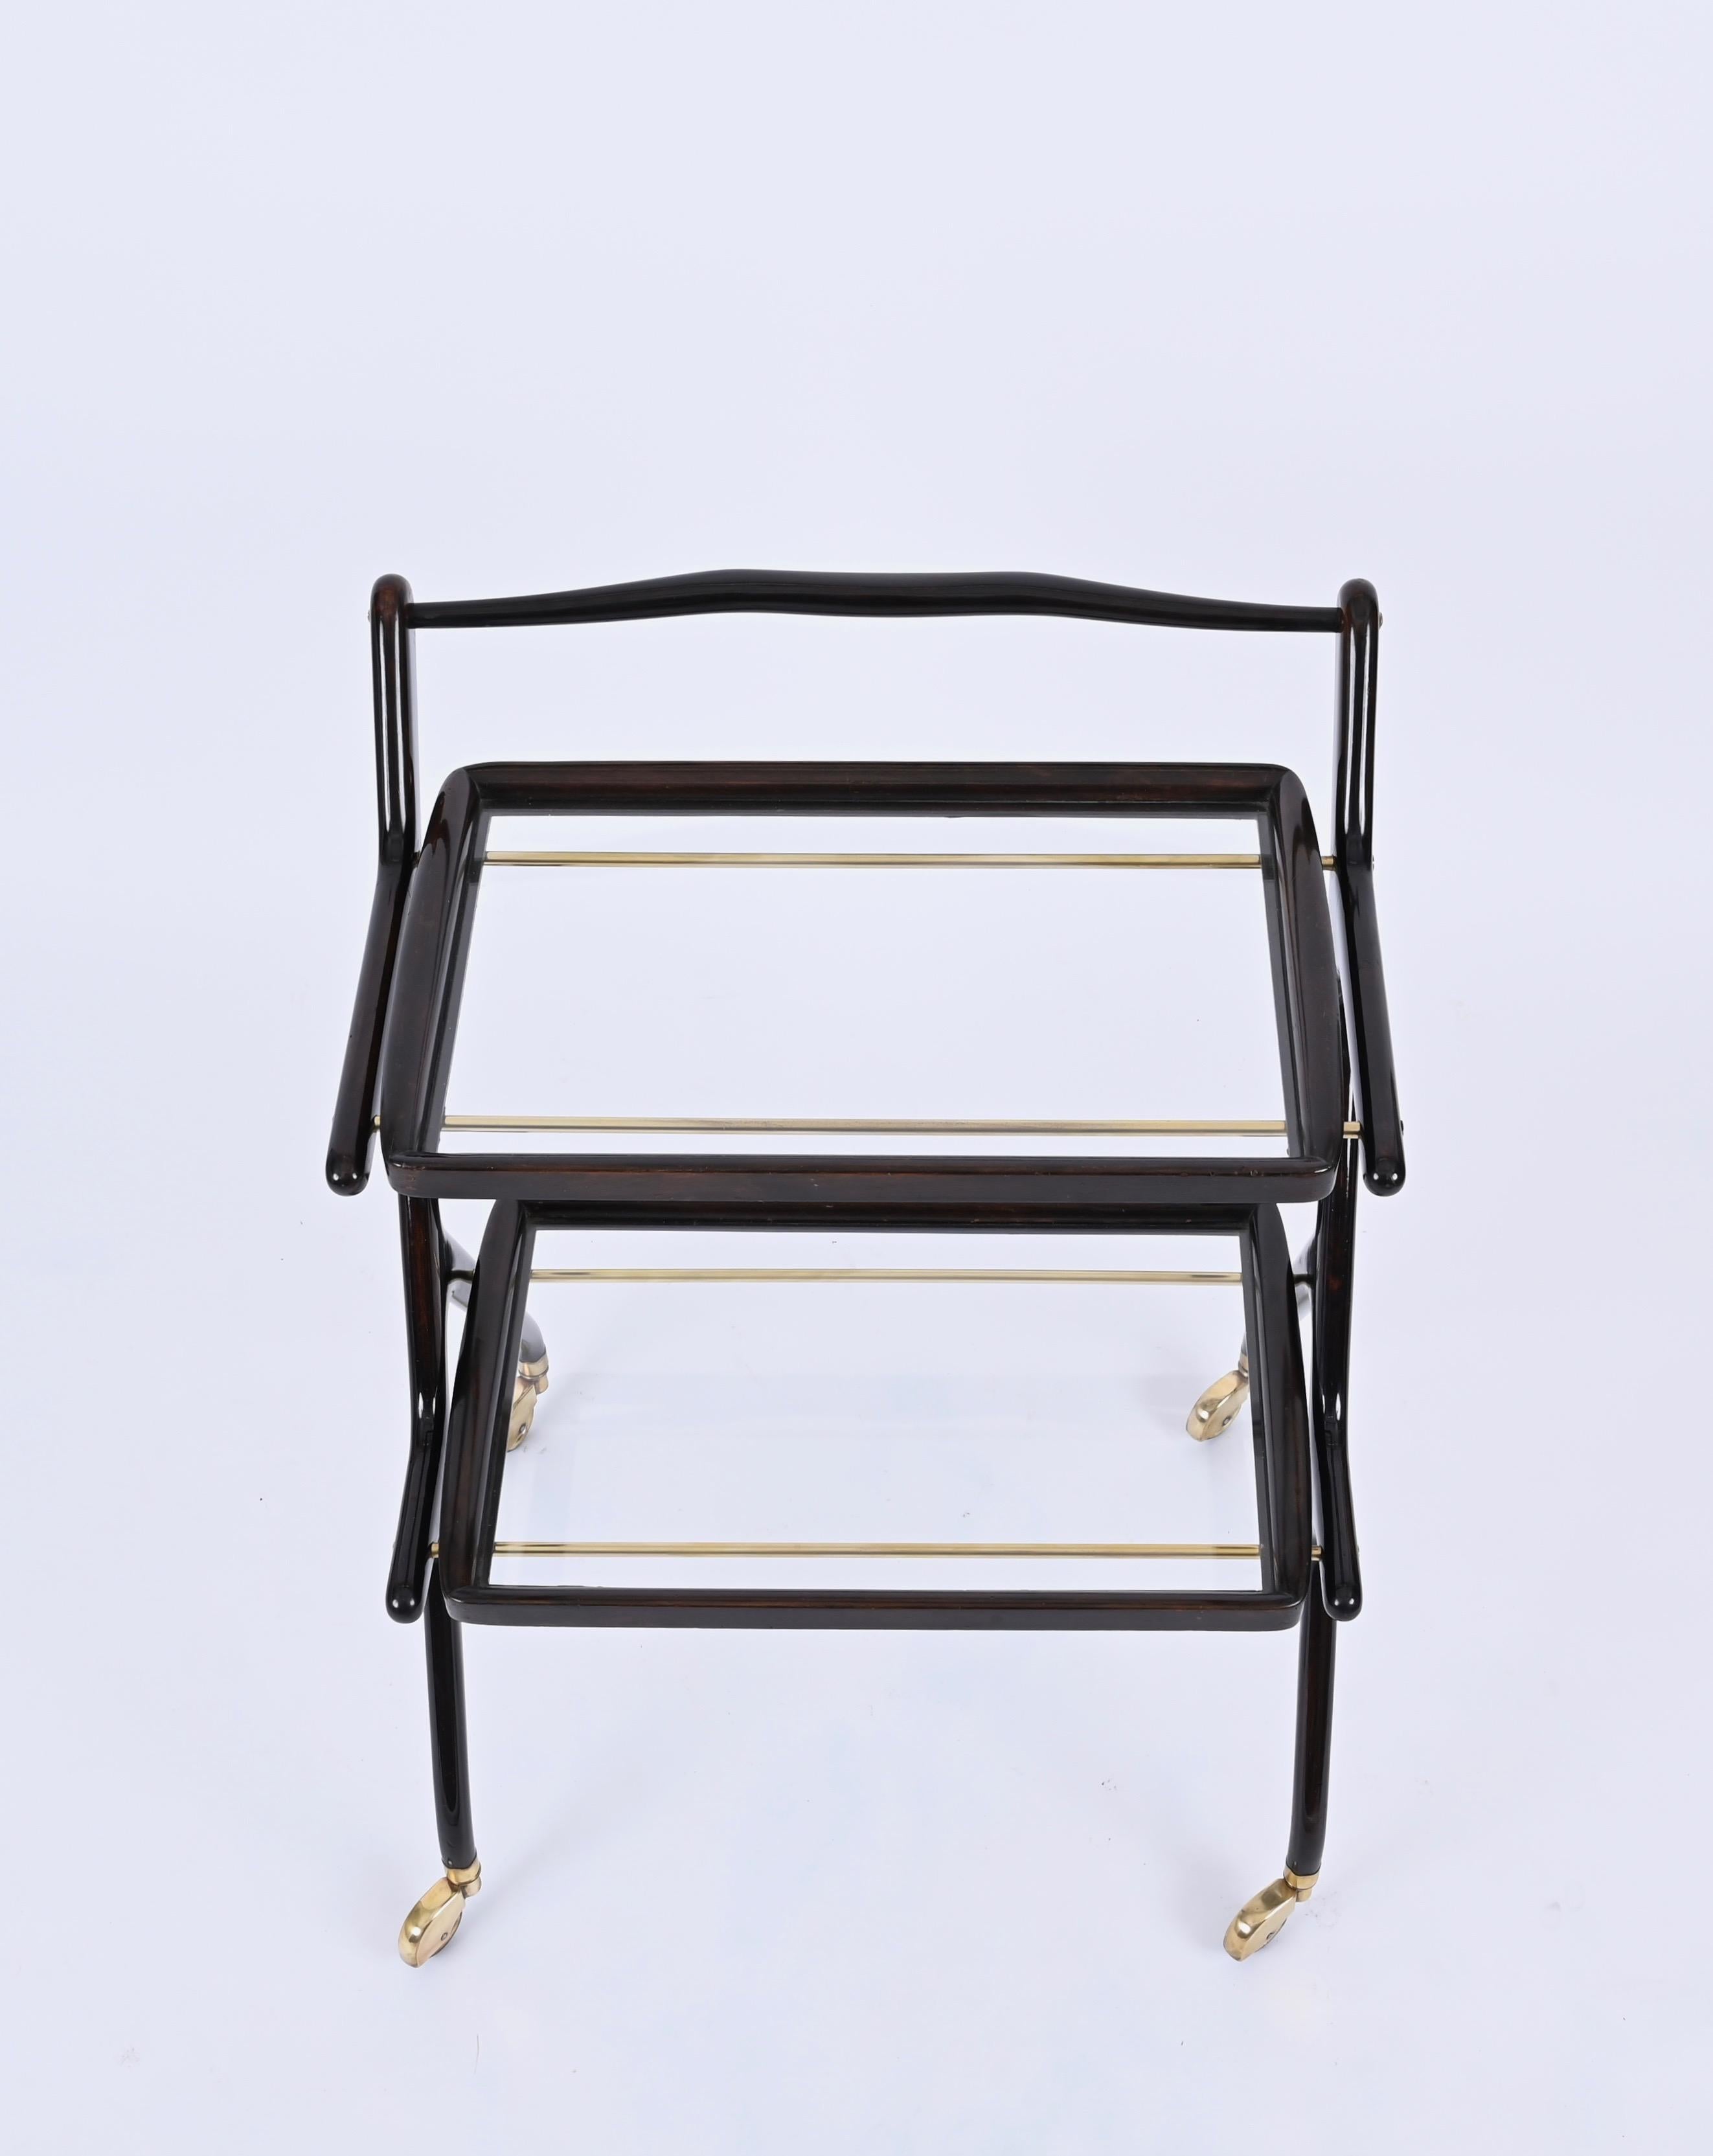 Hand-Crafted Cesare Lacca Midcentury Wood and Glass Italian Trolley Bar Cart, 1950s For Sale